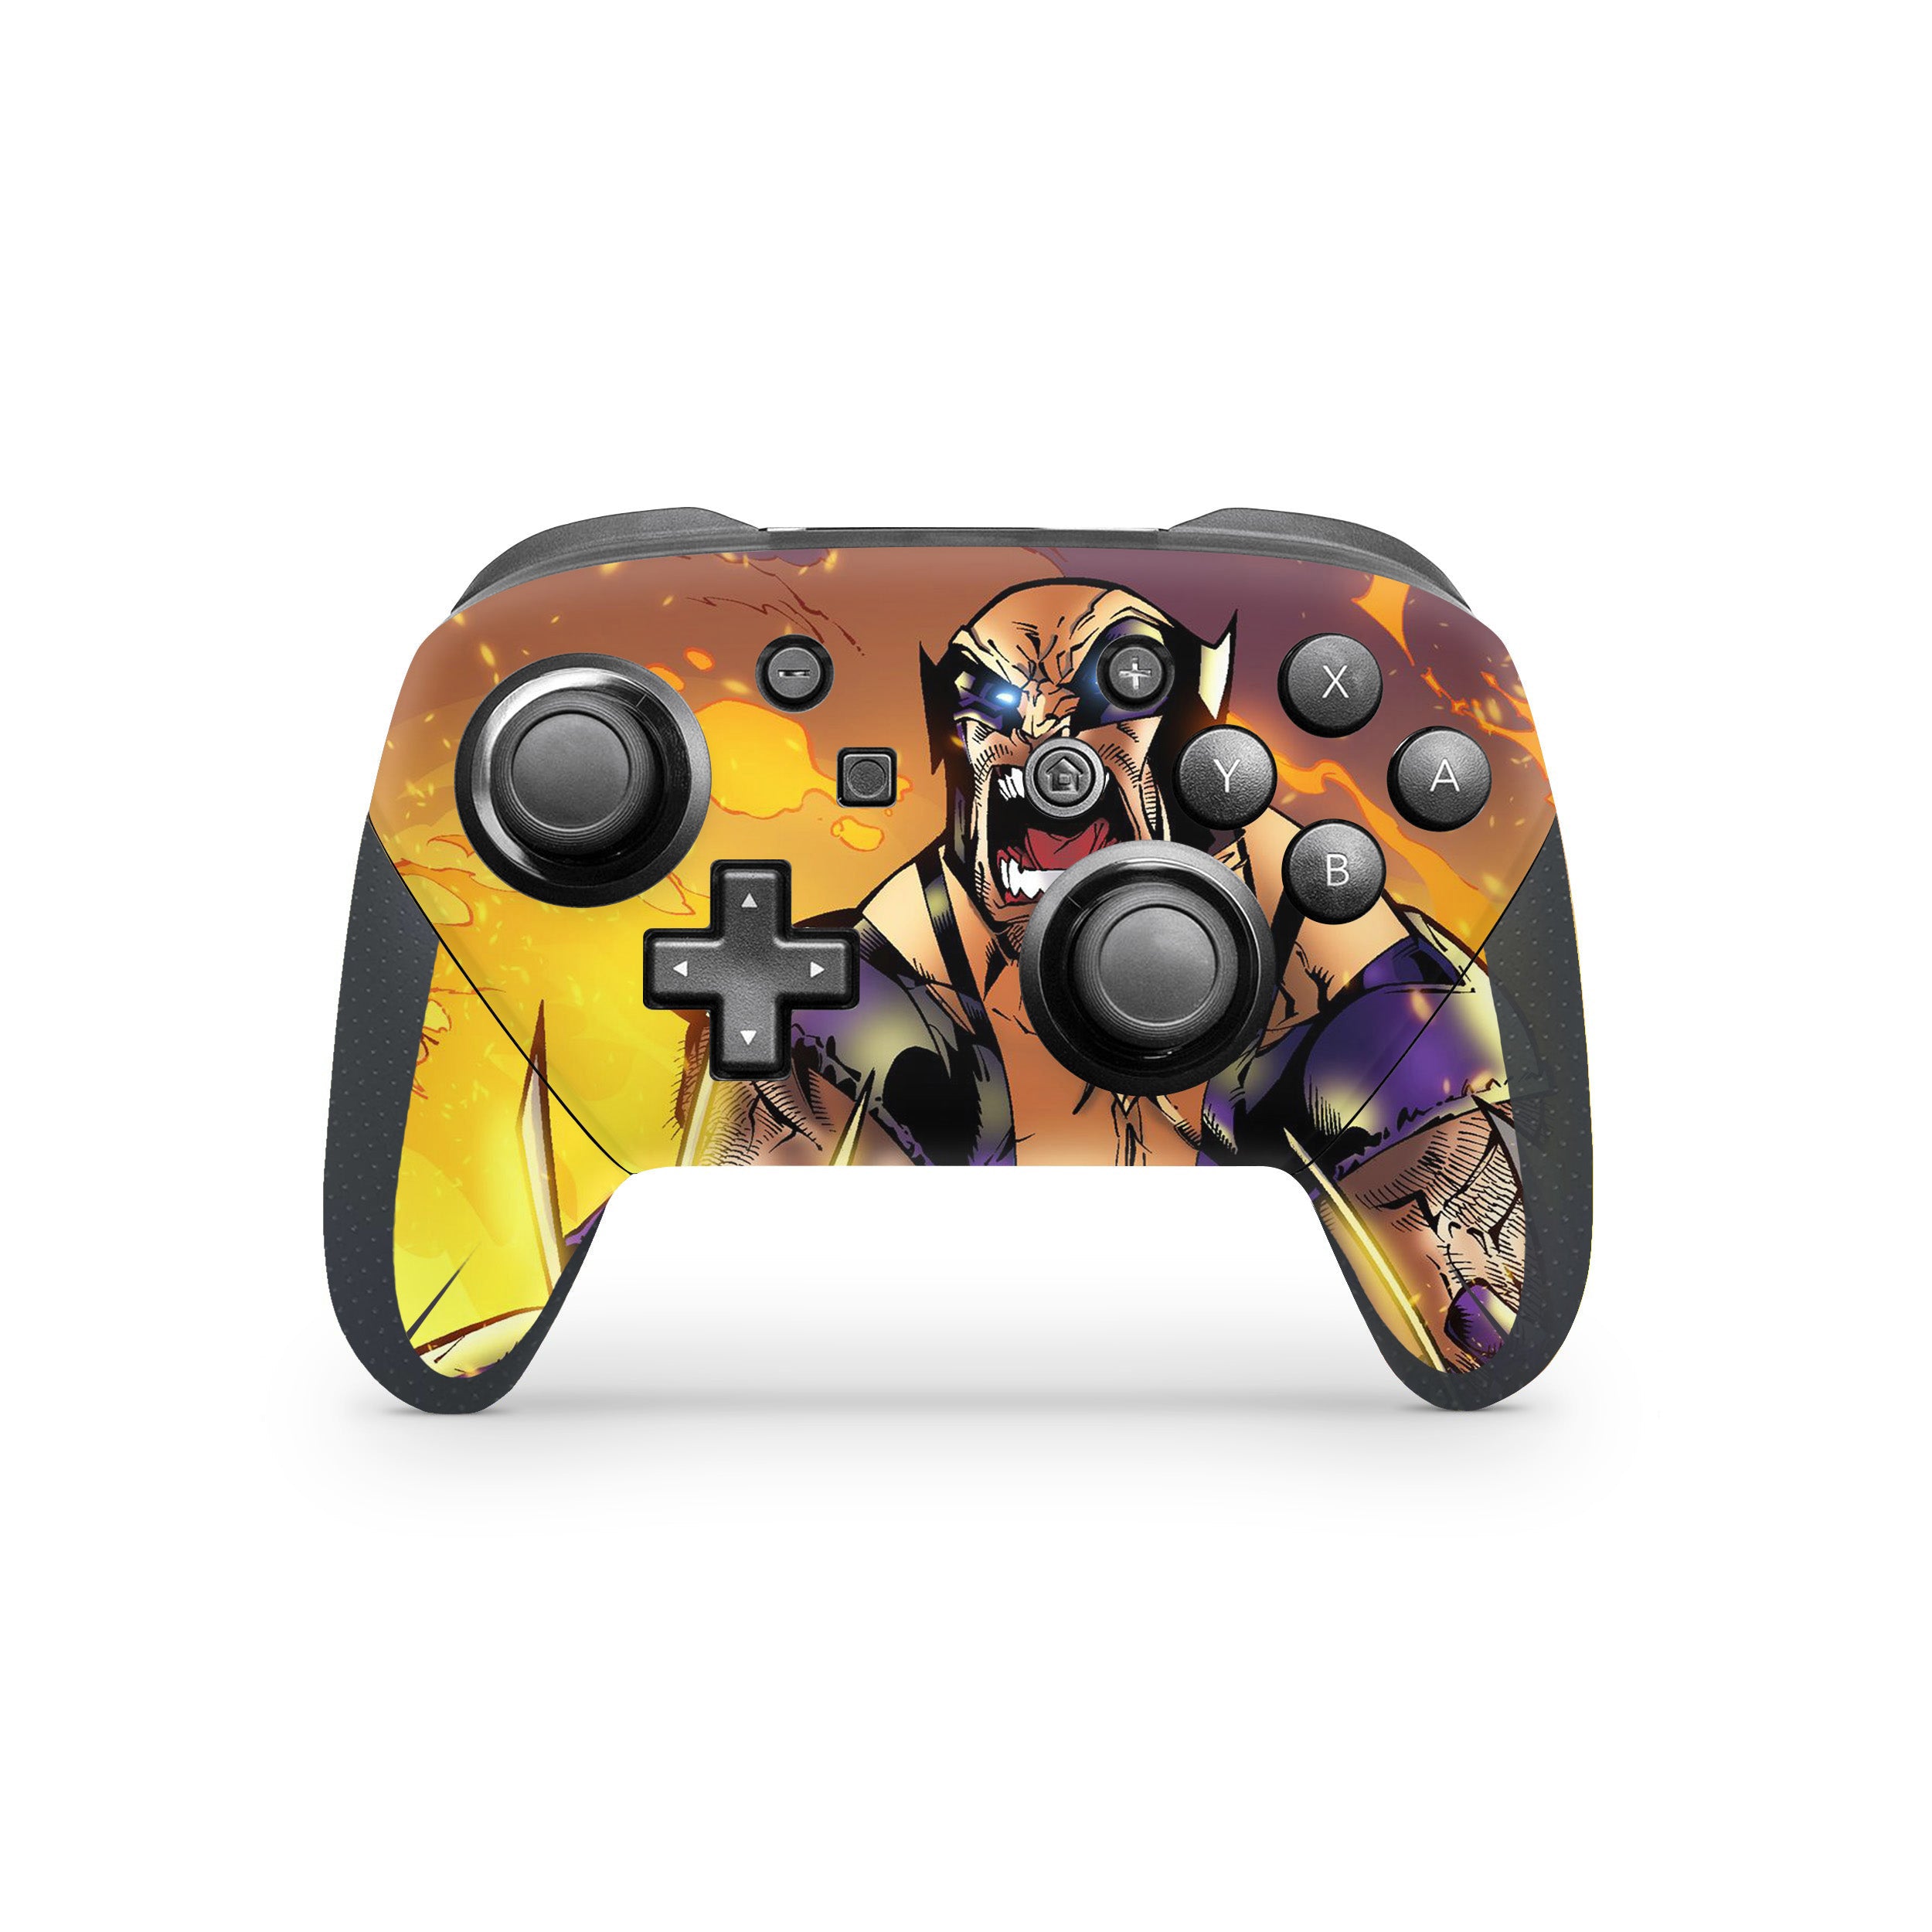 A video game skin featuring a Marvel X Men Wolverine design for the Switch Pro Controller.